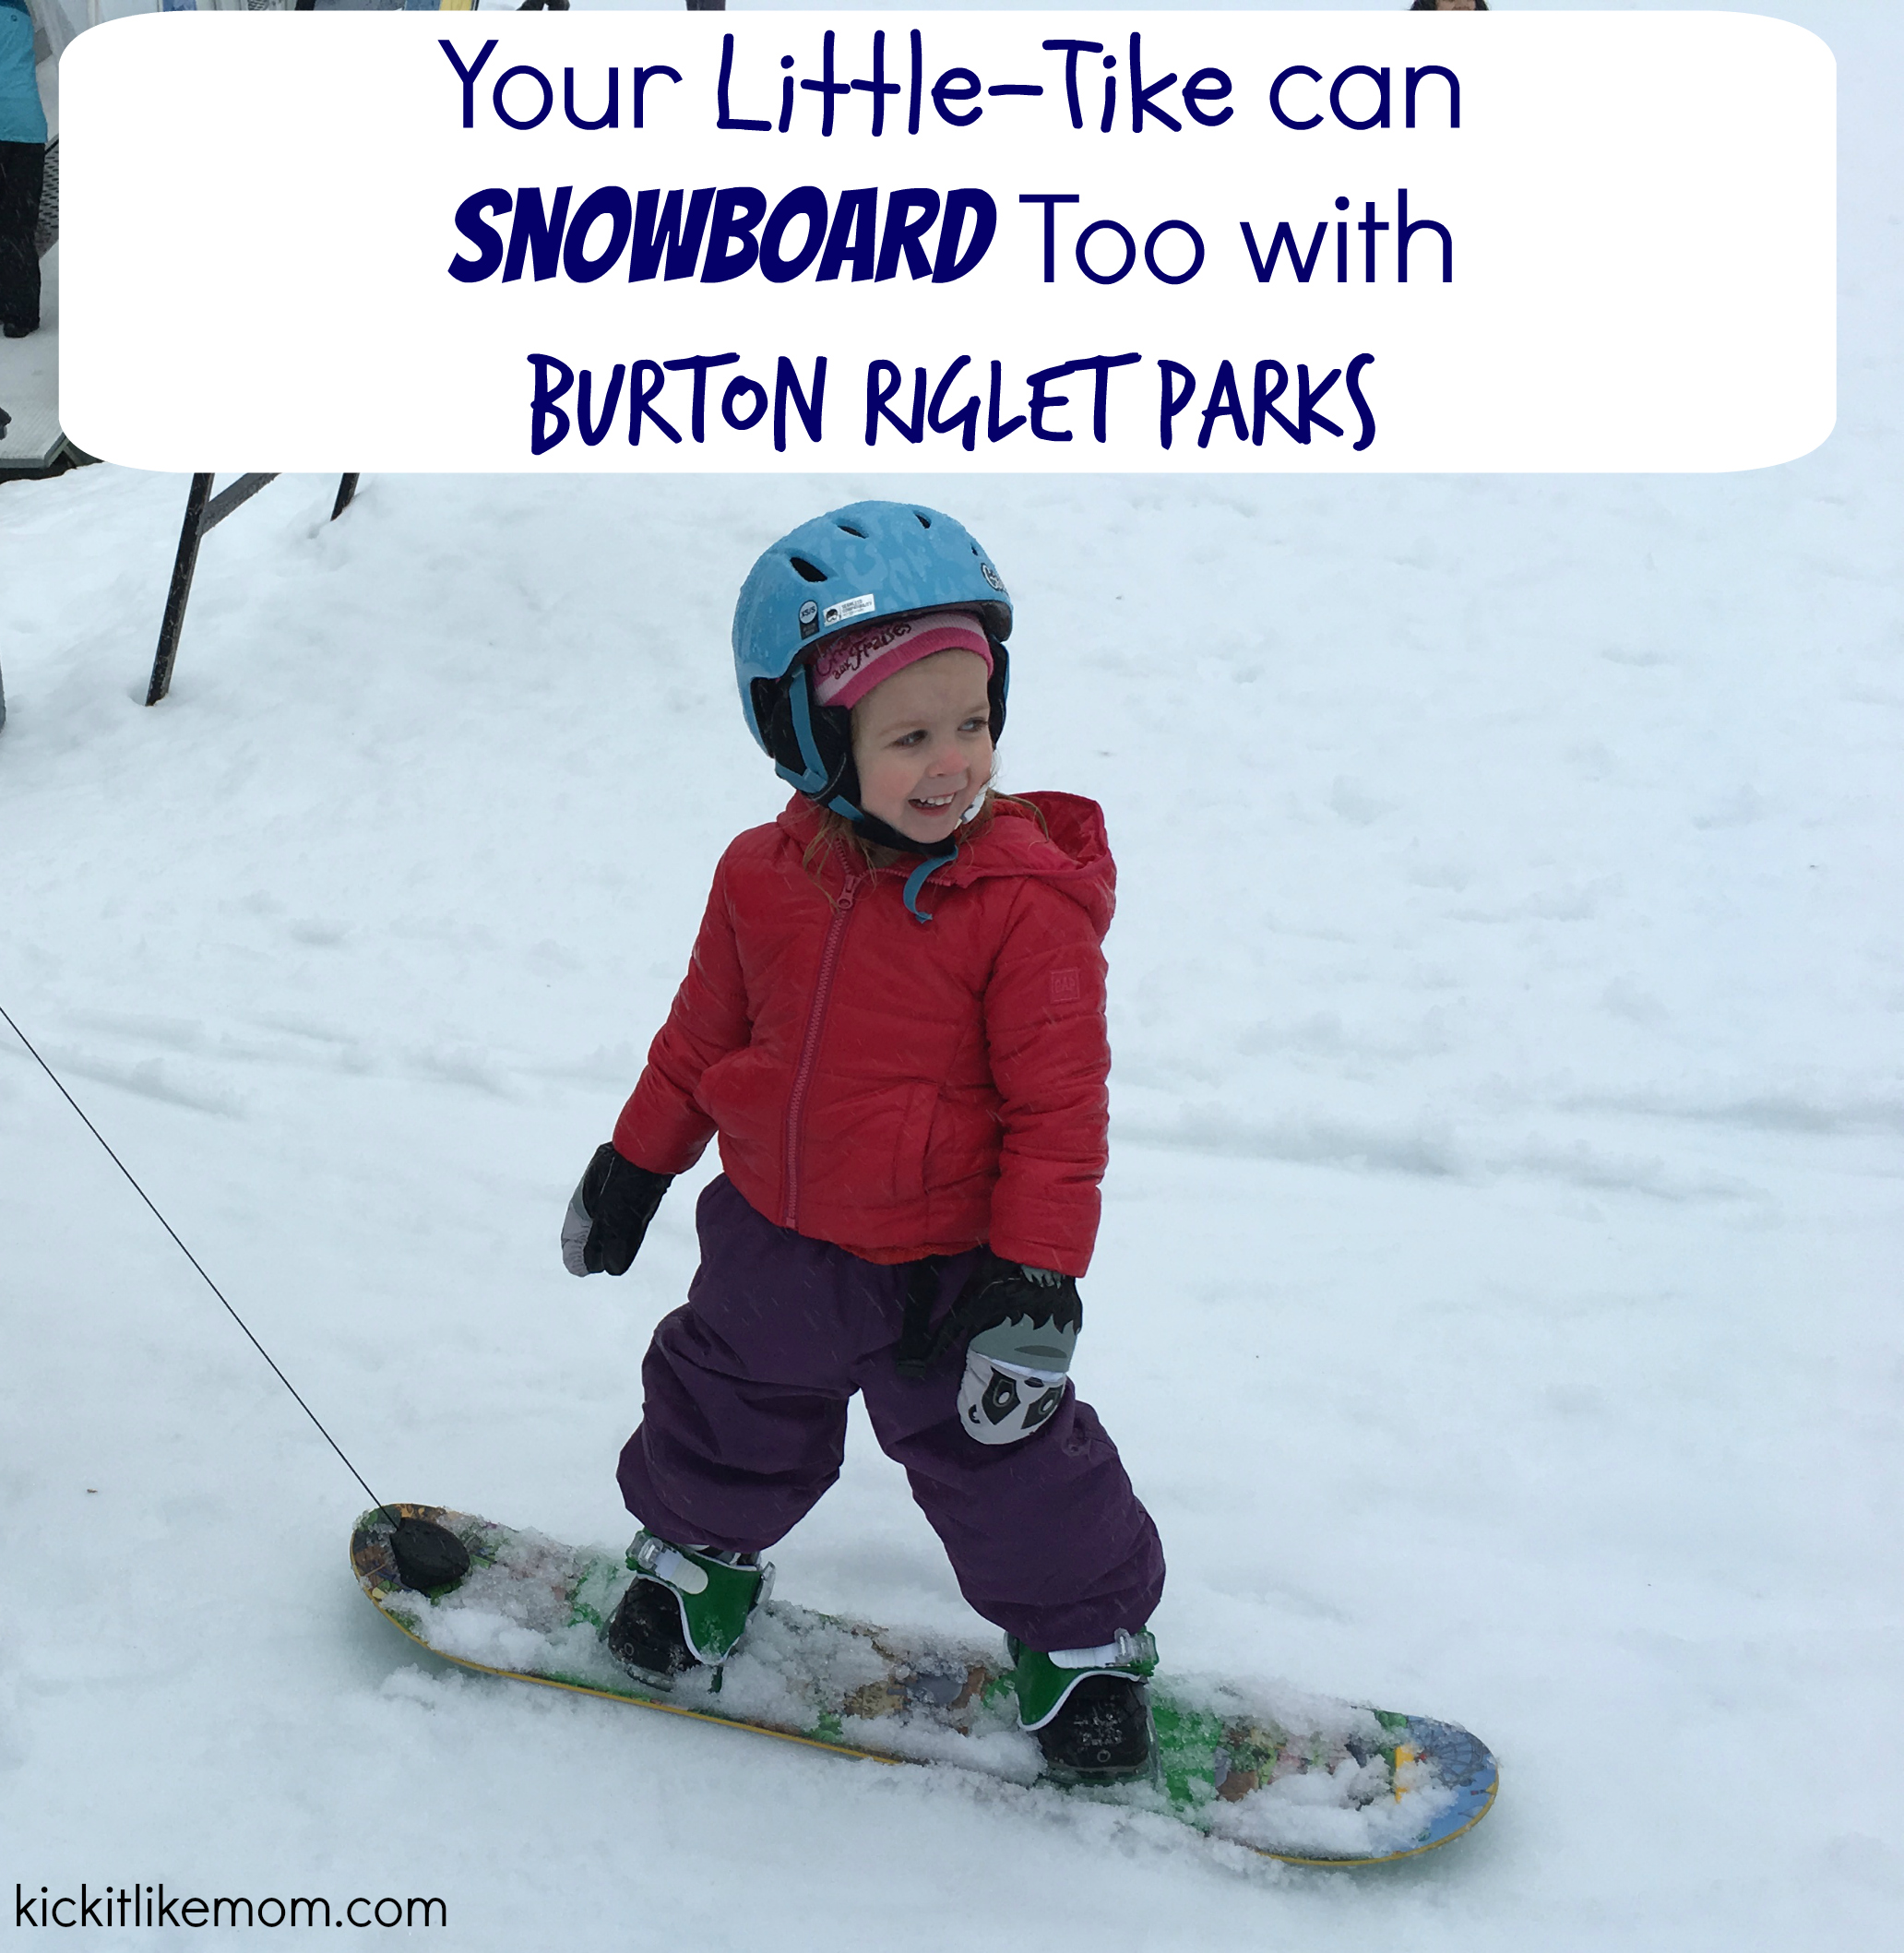 Burton Riglet Toddler Kids' Snowboard Product Overview Tips, 58% OFF